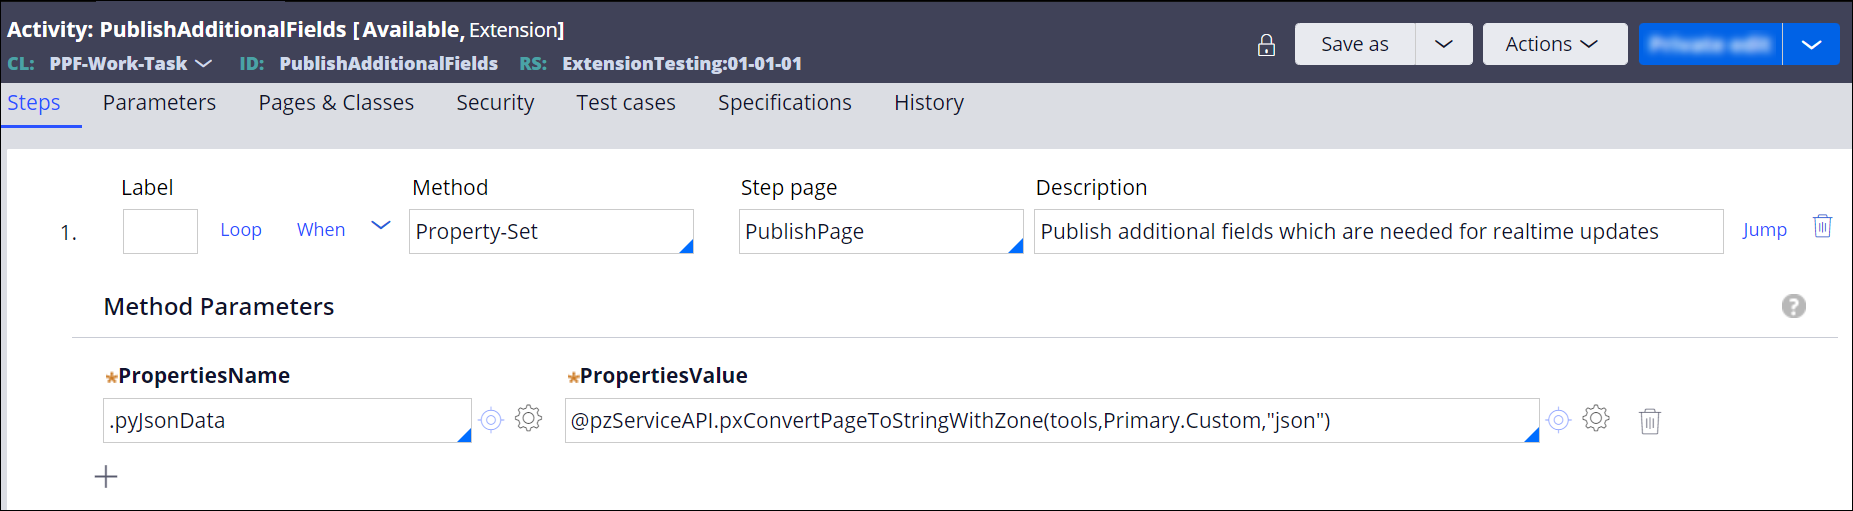 The PublishAdditionalFields activity configured to publish additional fields for real time updates.